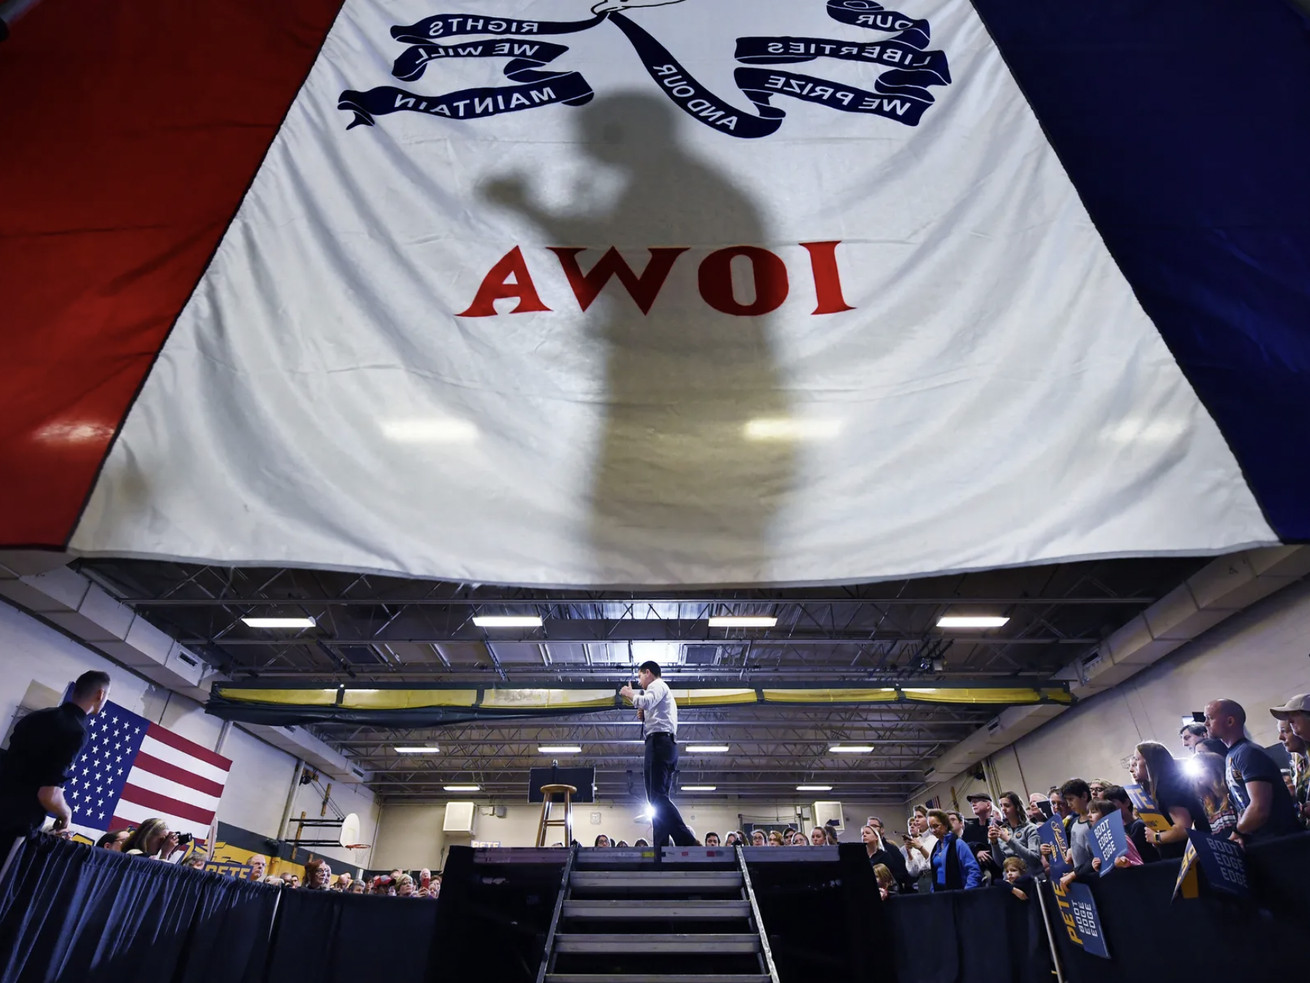 A shadow of a man is cast on a large white banner reading “Iowa” hanging in a school gym, where the middle of the room is a stage platform and the man is walking onto it.